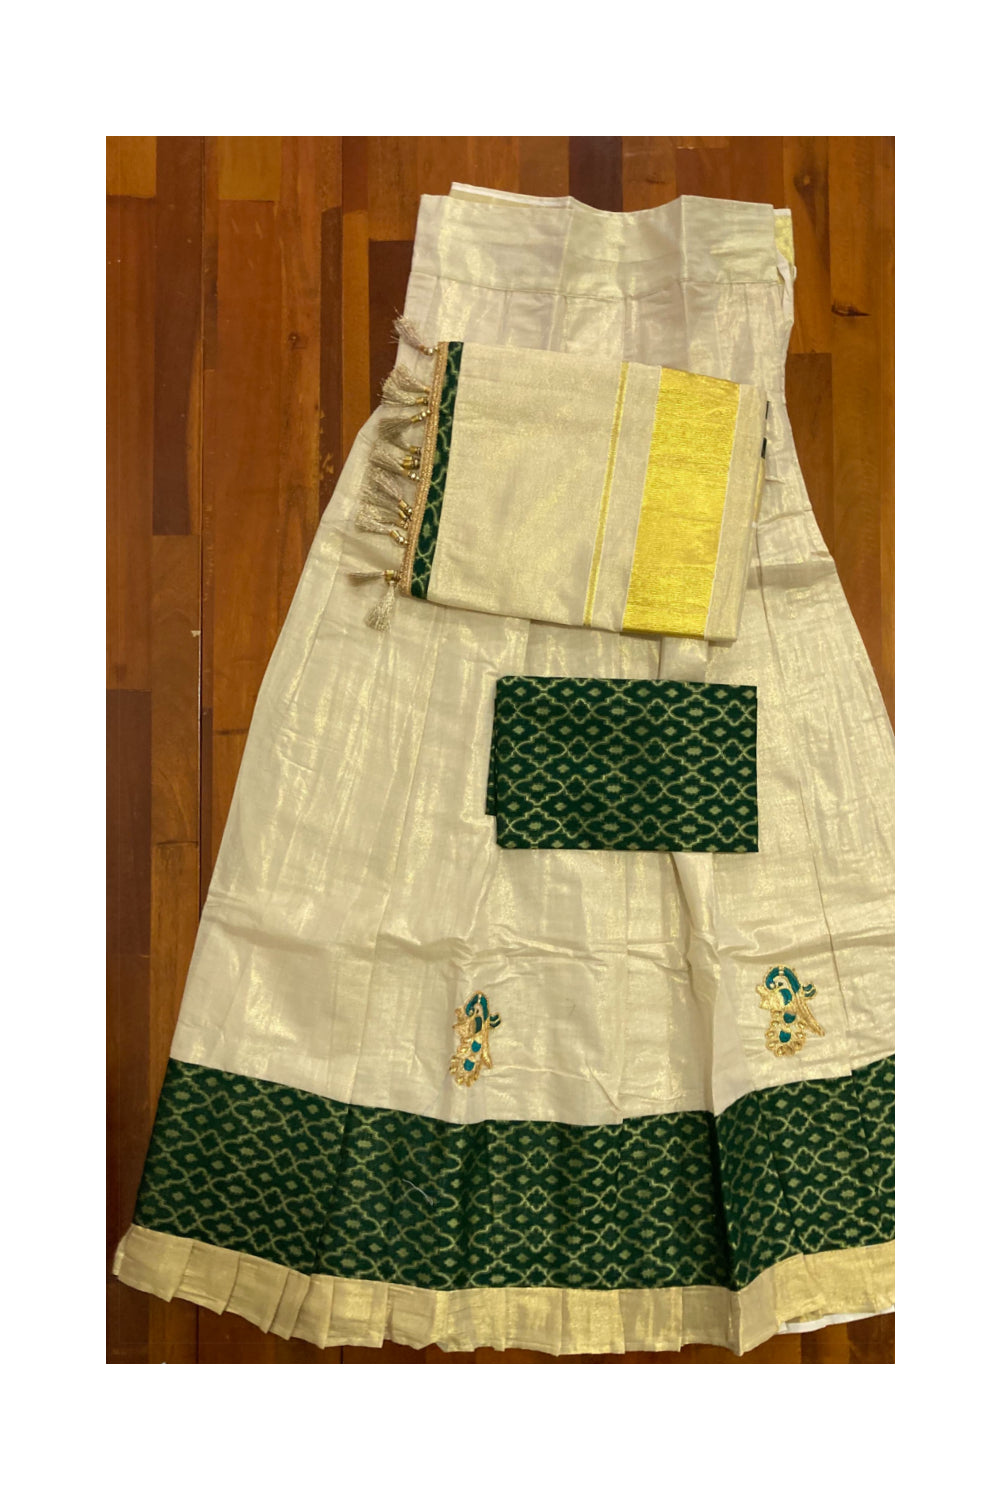 Kerala Tissue Stitched Dhavani Set with Blouse Piece and Neriyathu in with Dark Green Accents